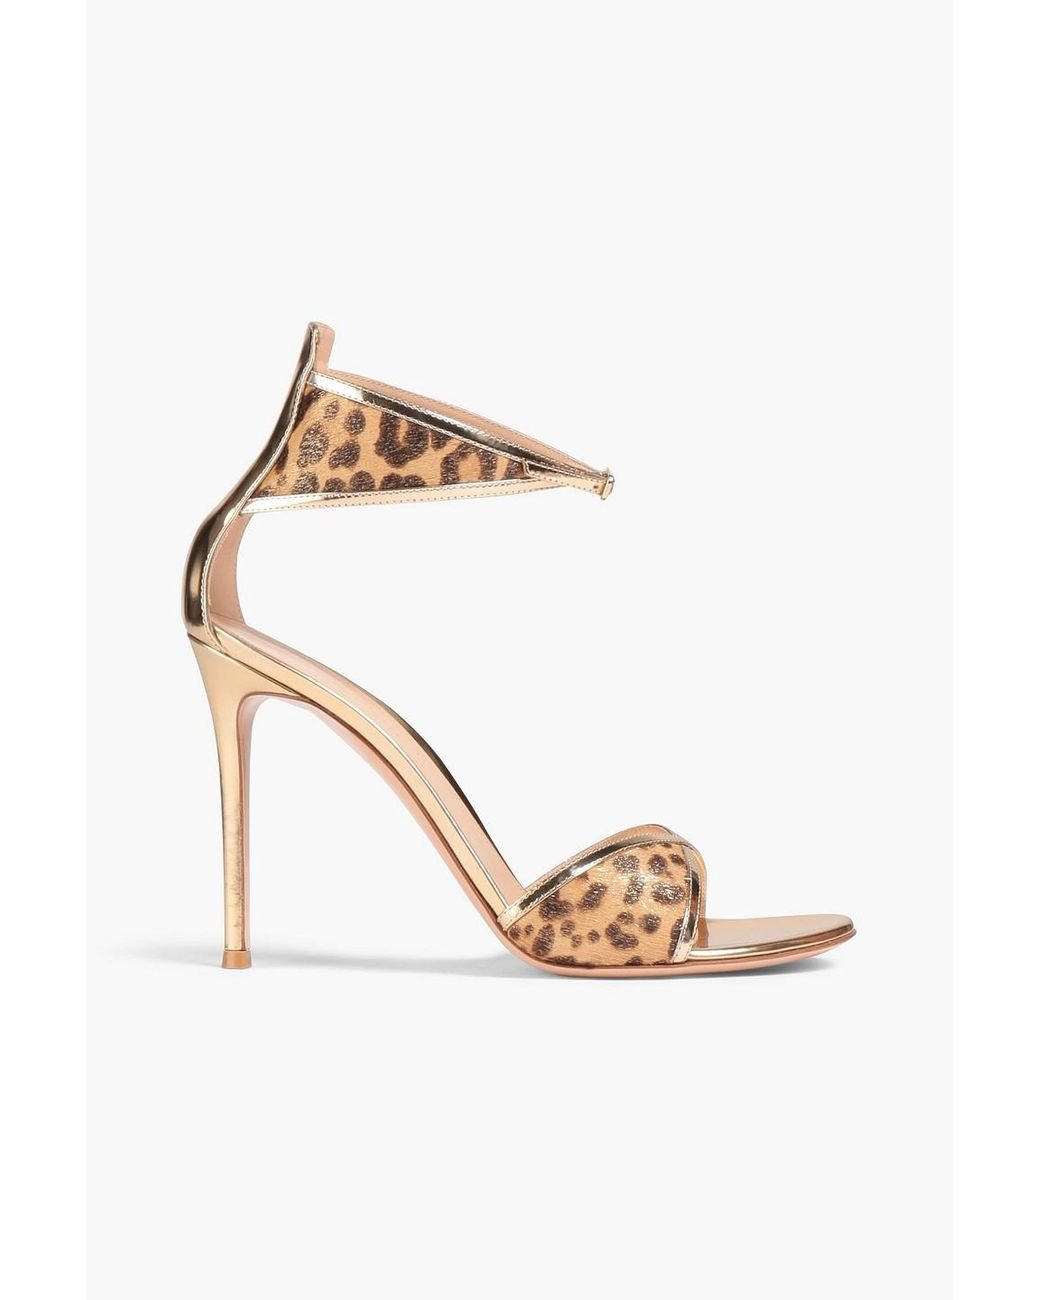 Gianvito Rossi Metallic Leopard-print Calf Hair And Mirrored-leather Sandals  in White | Lyst Canada